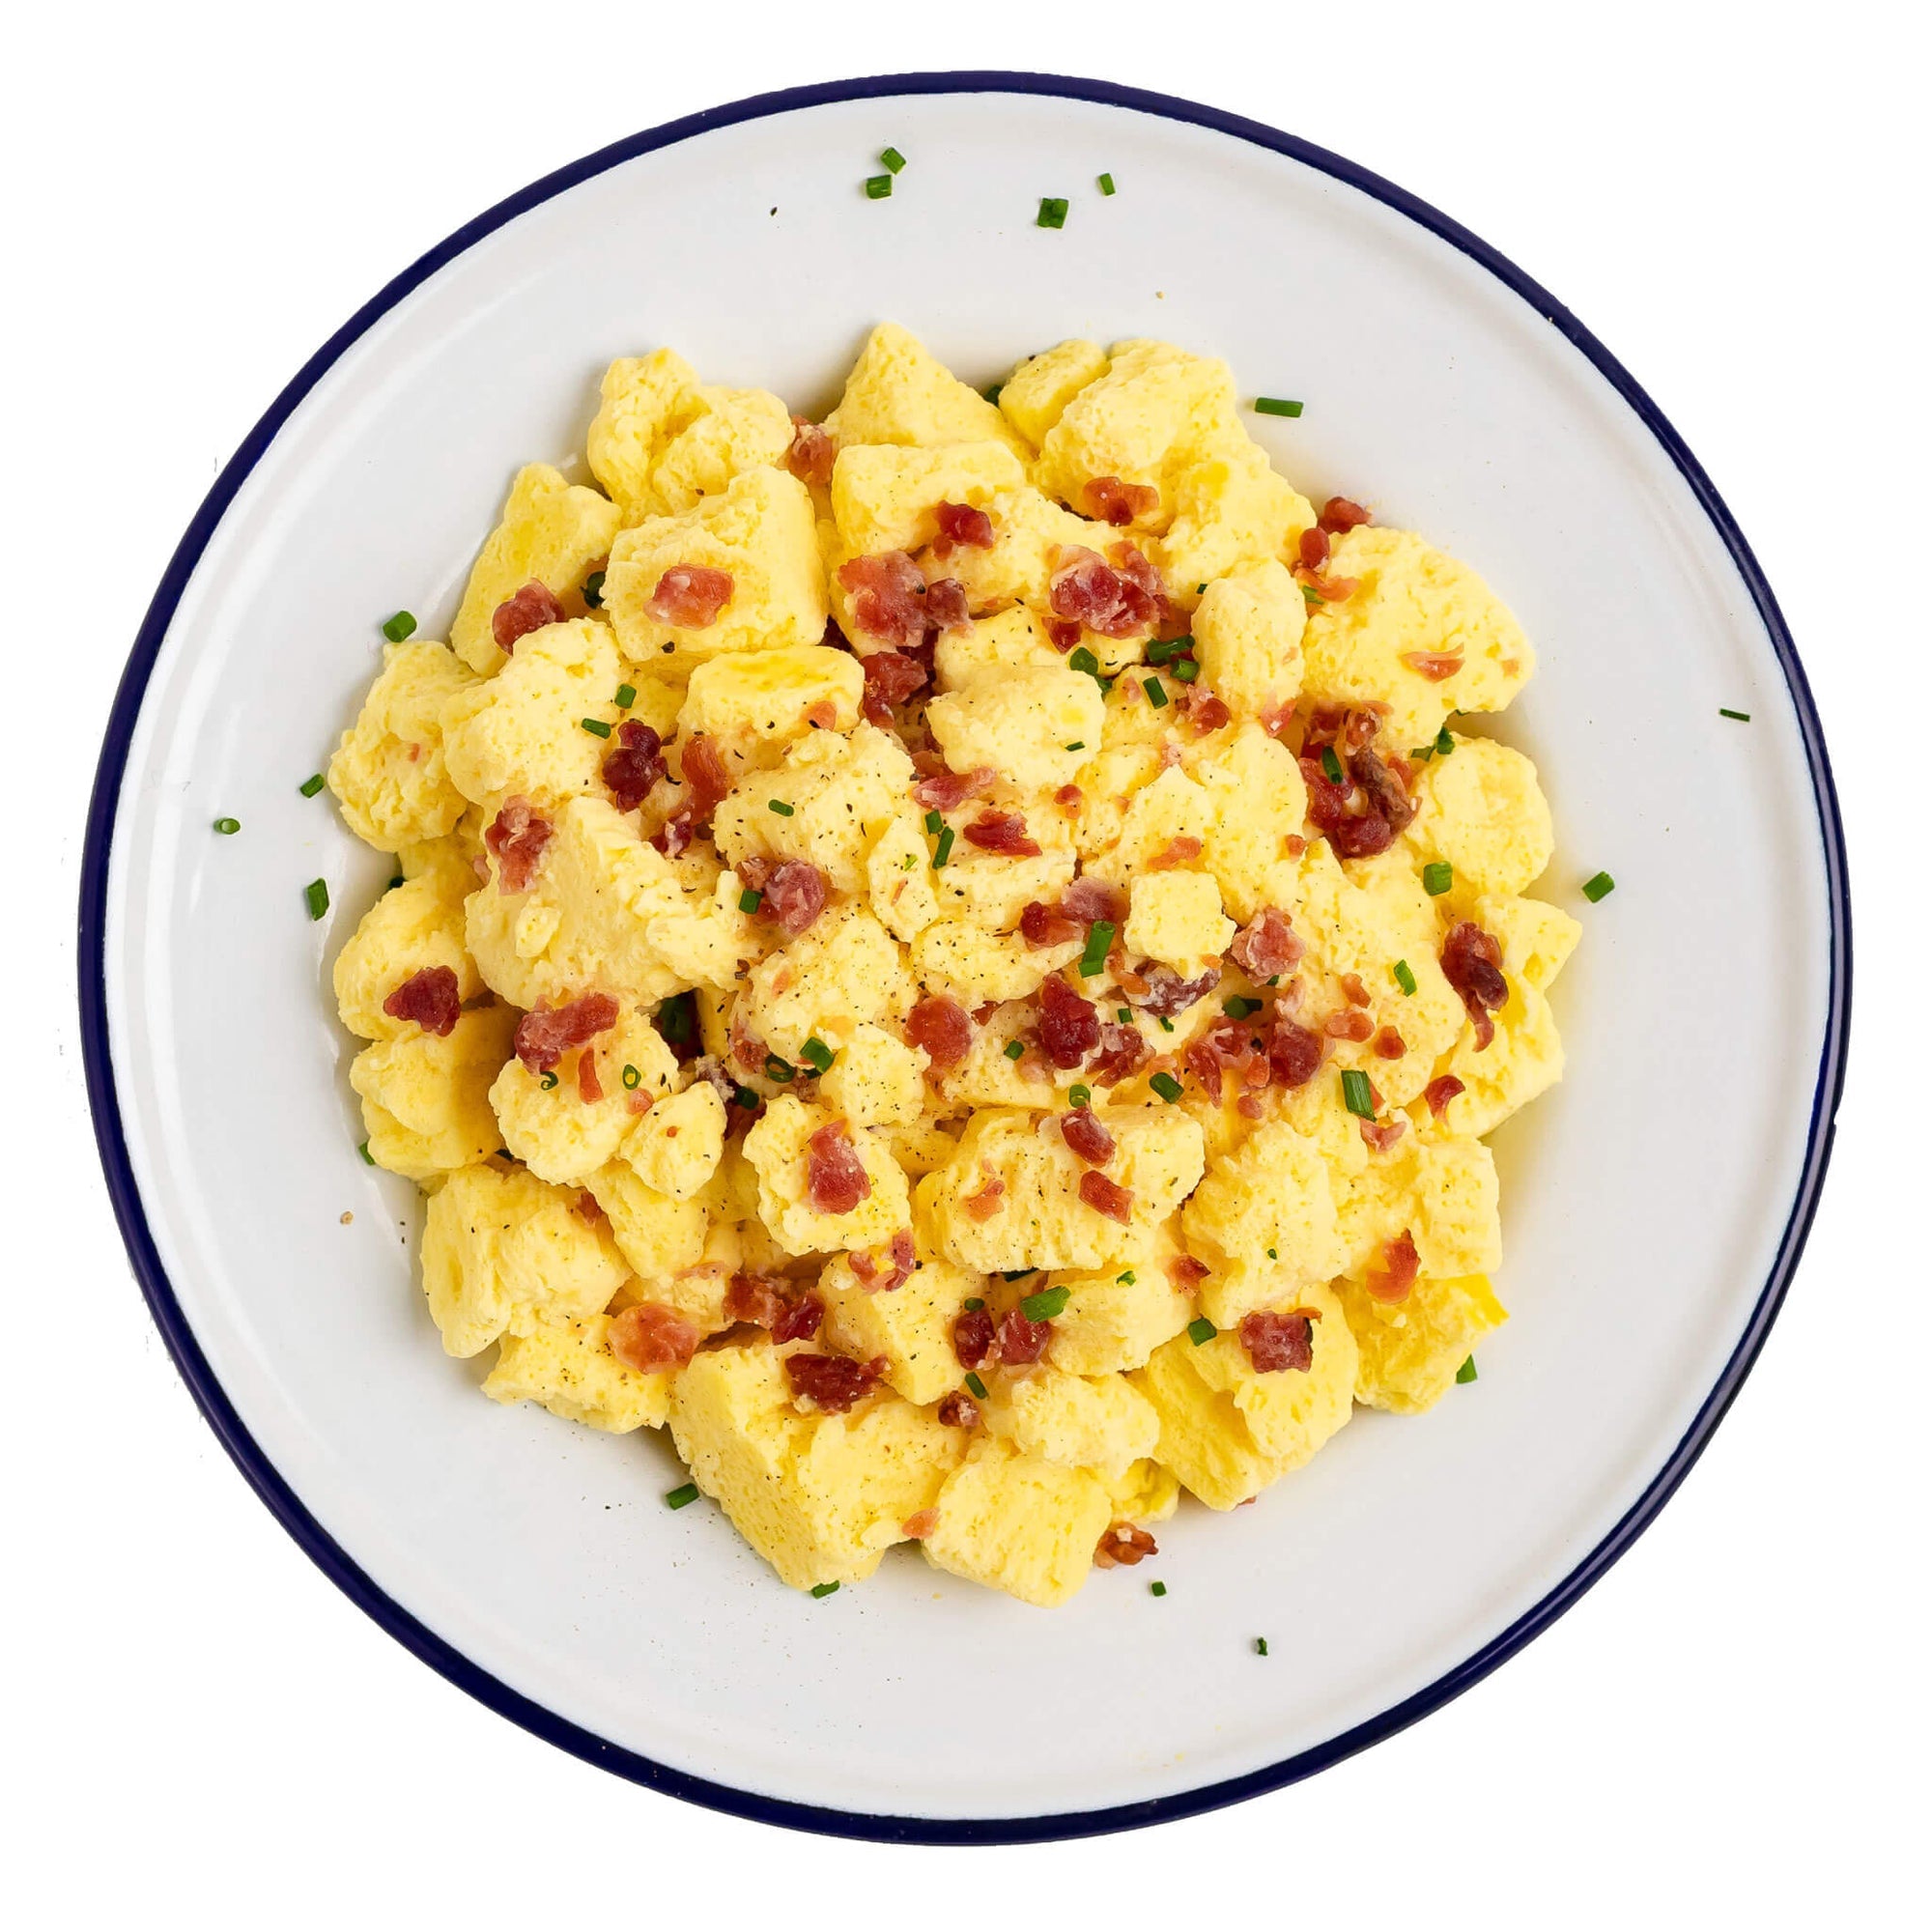 Mountain House Scrambled Eggs and Bacon